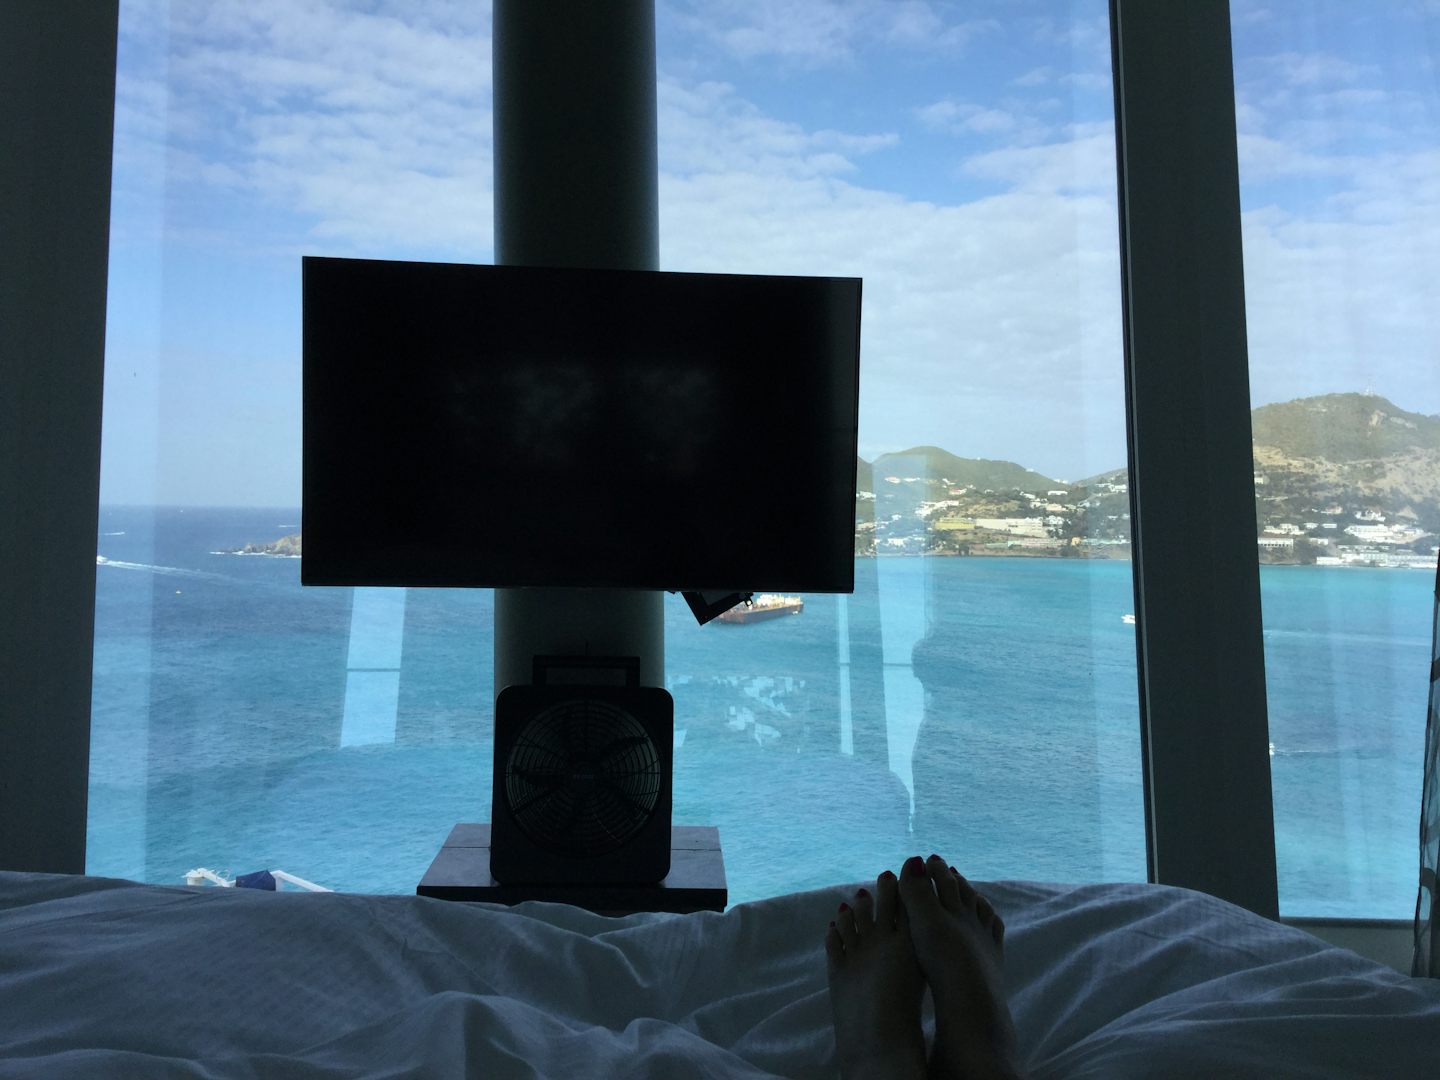 View from the bed